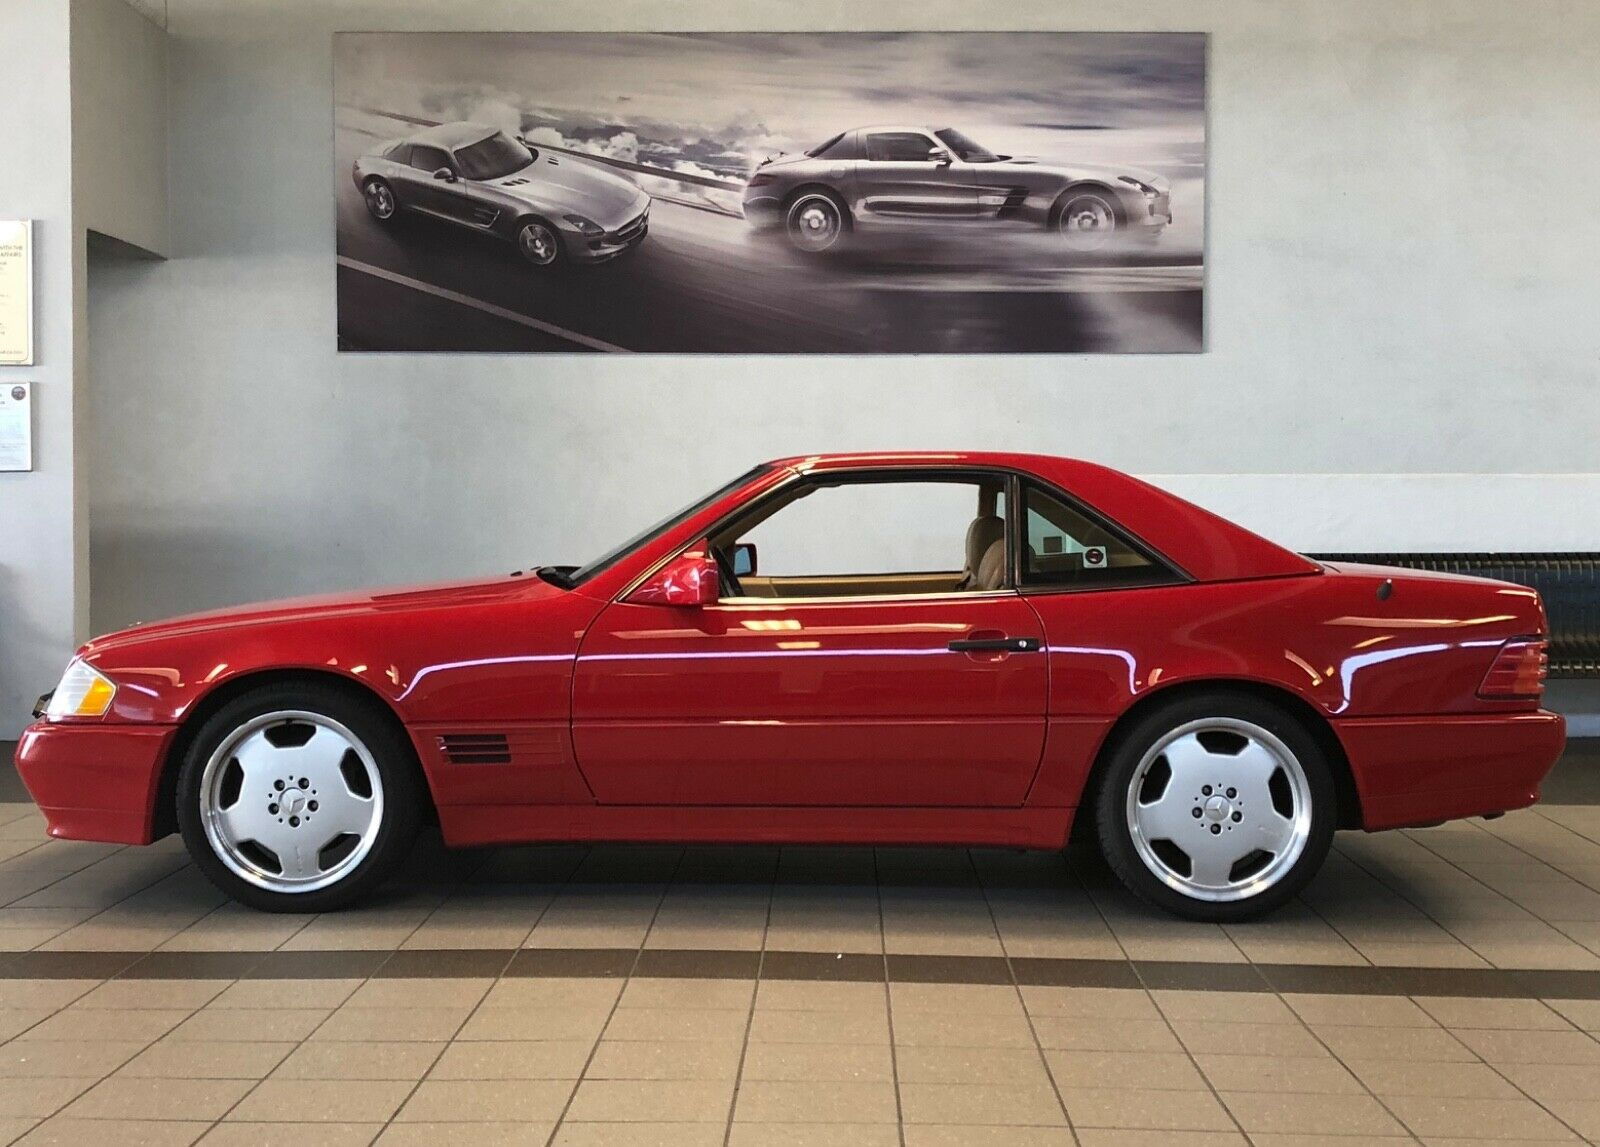 1991 Mercedes-Benz 500SL - 1991 500SL Roadster with 68k miles Amg monoblocks - Used - VIN WDBFA66E7MF02383 - 68,400 Miles - 8 cyl - 2WD - Automatic - Convertible - Red - Garden Grove, CA 92840, United States